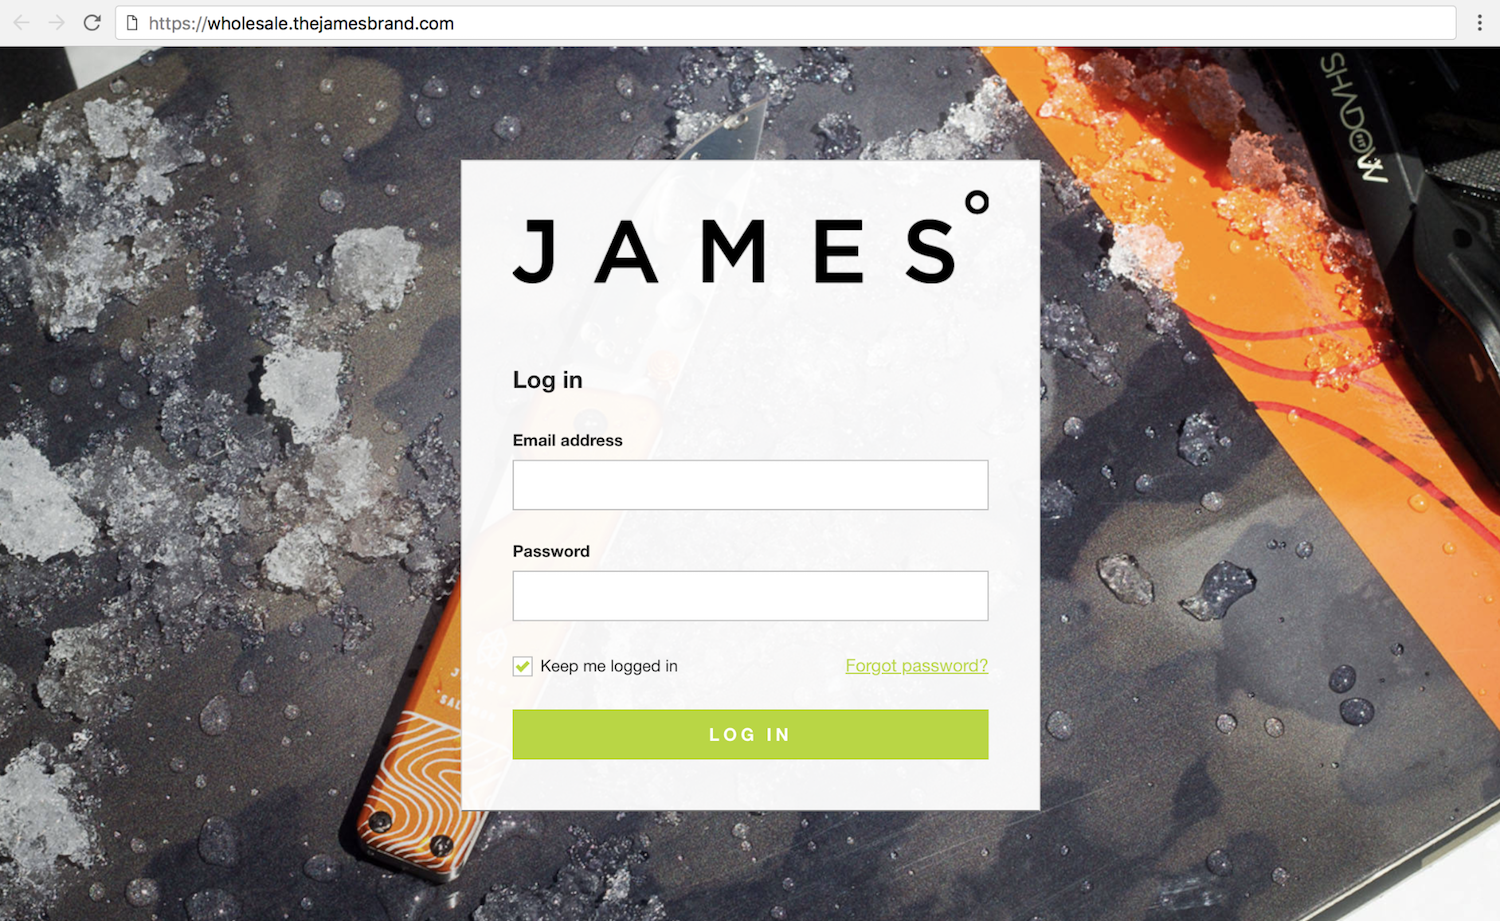 The James Brand’s wholesale ecommerce storefront with branded URL